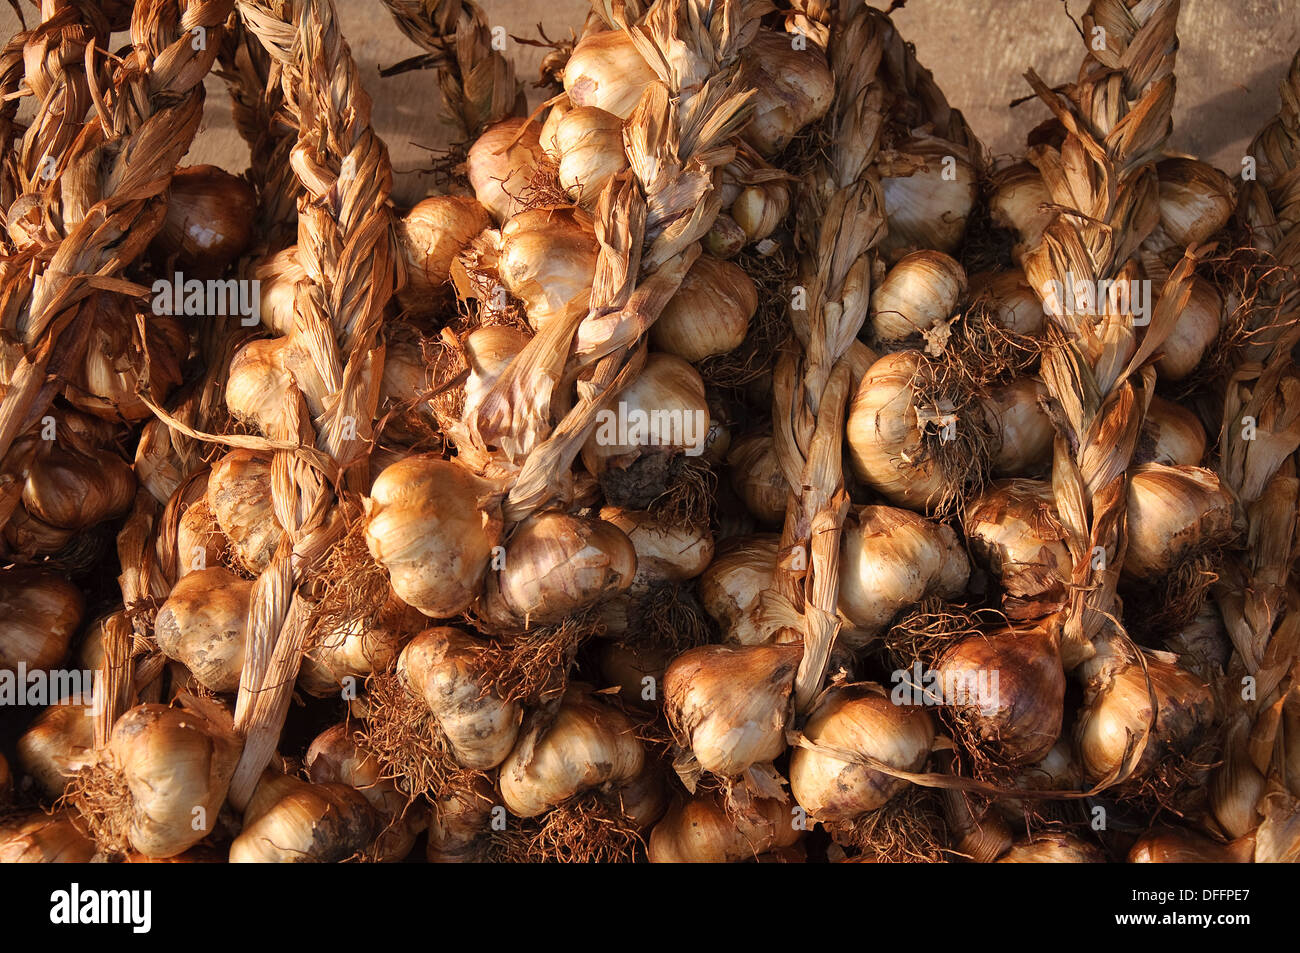 Garlic at a farmers market in Peronne, Picardie, France Stock Photo